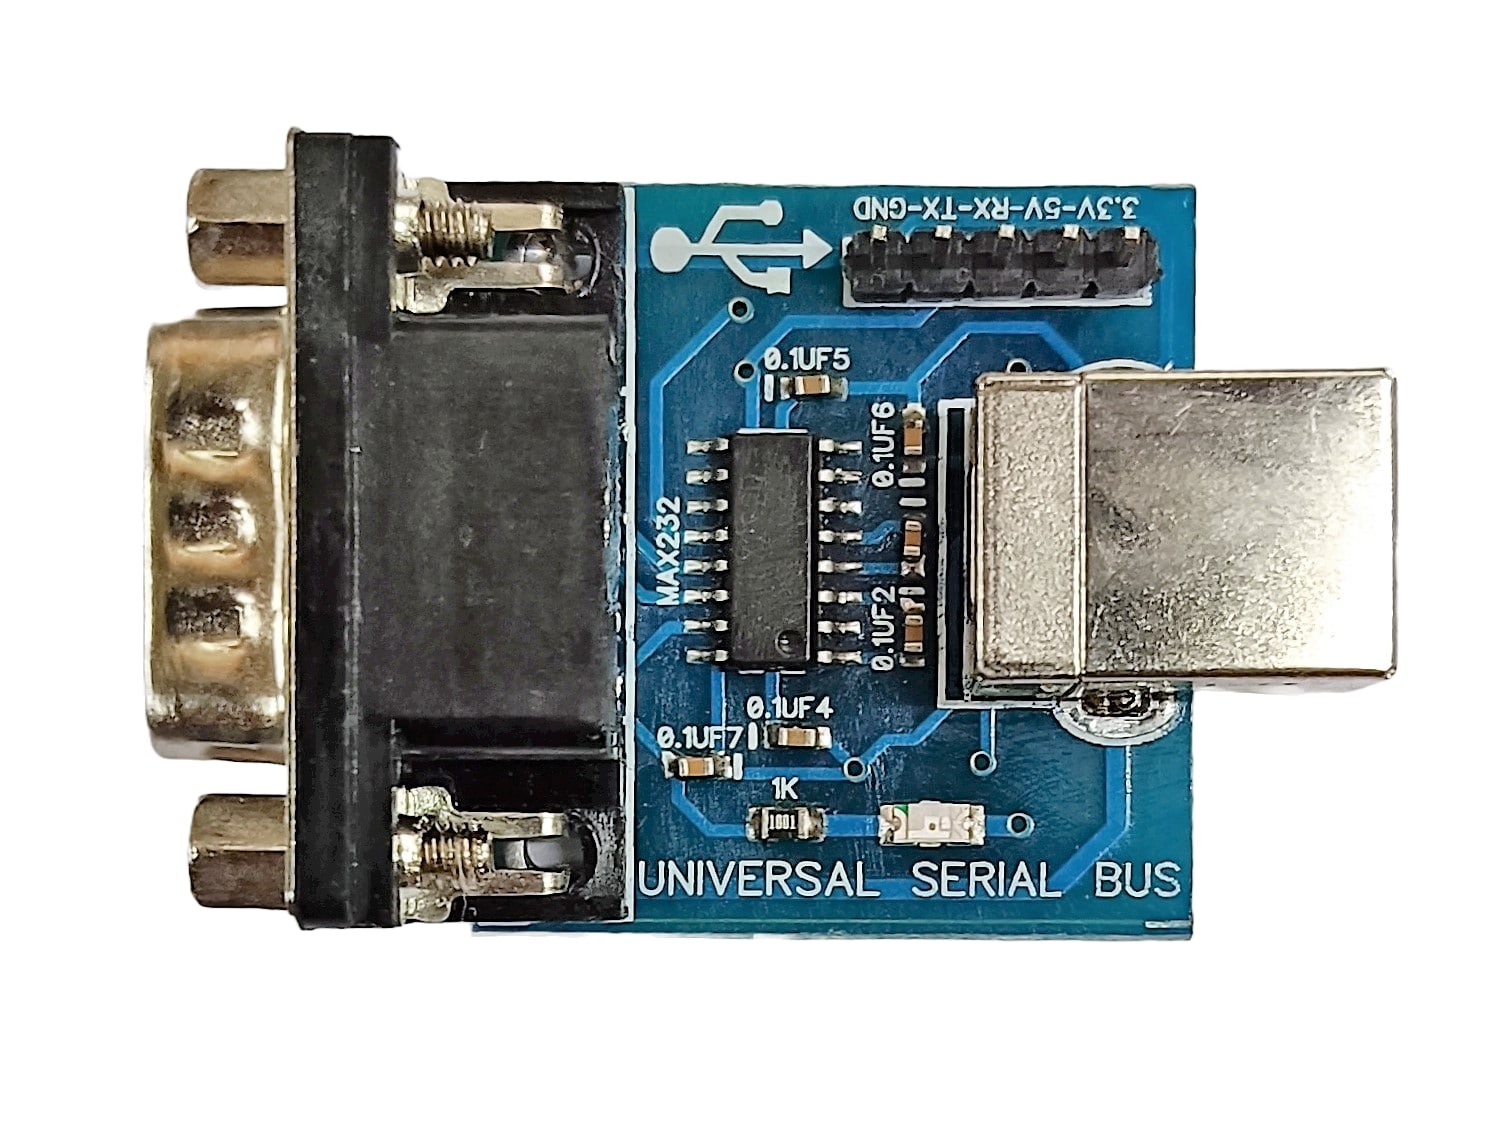 USB to Serial CH9102 convertor